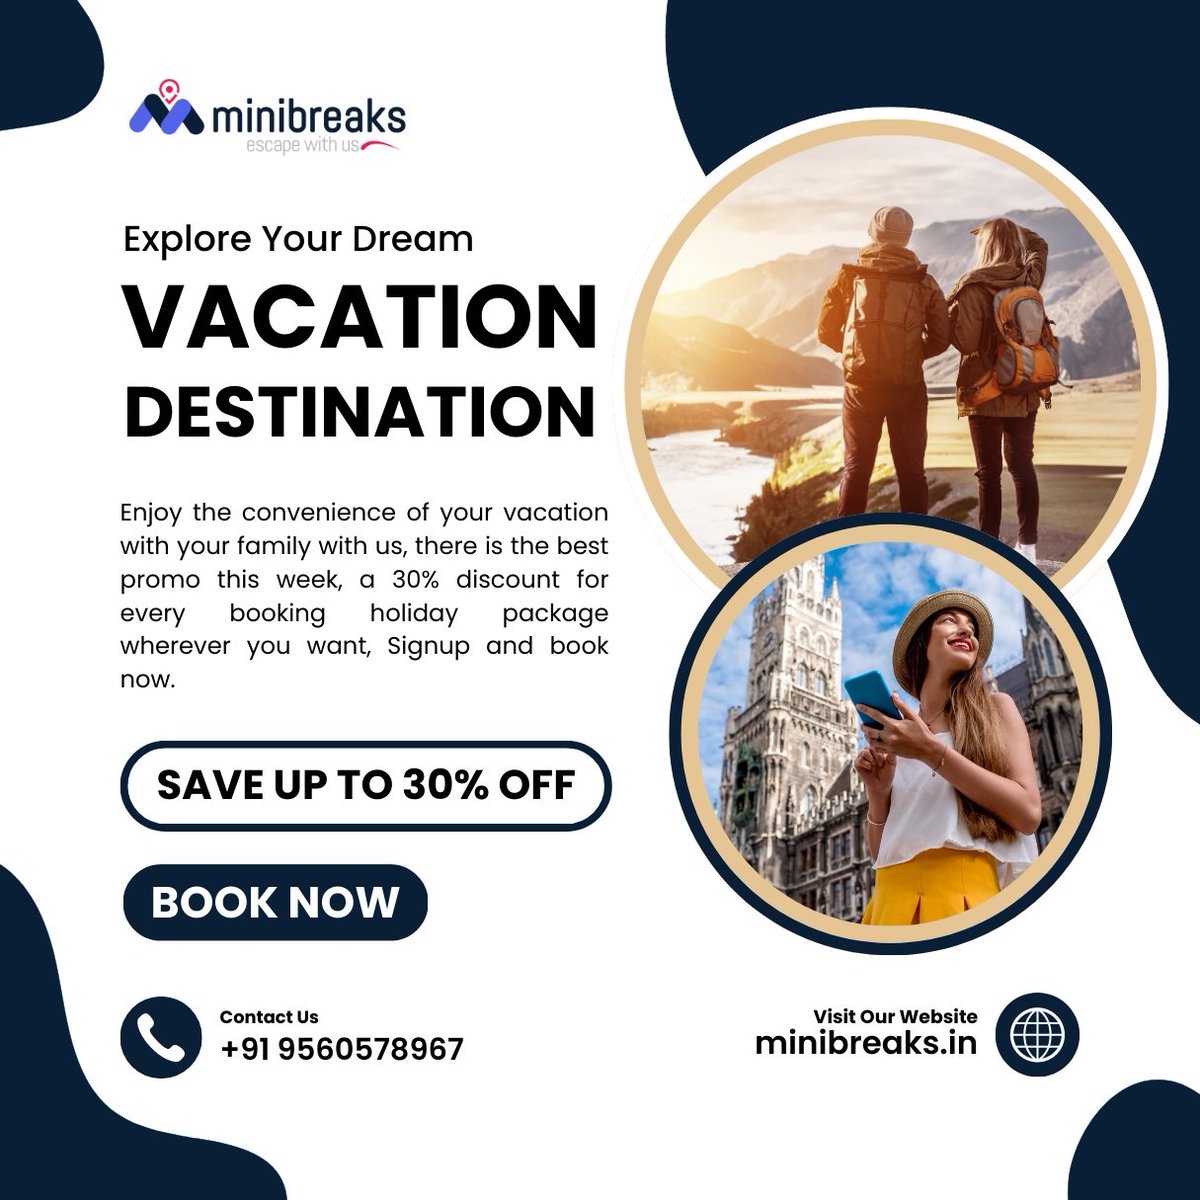 Enjoy a vacation that doesn't break your budget, no matter where you go. 😊😊
.
.
Enquire at +91 9560578967
info@minibreaks.in
.
.
.
.
#travelling #paradise #dream #travelluxury #bestresorts #explore #luxurytrip #traveller #luxury #beautiful #luxurytraveldaily #minibreaks